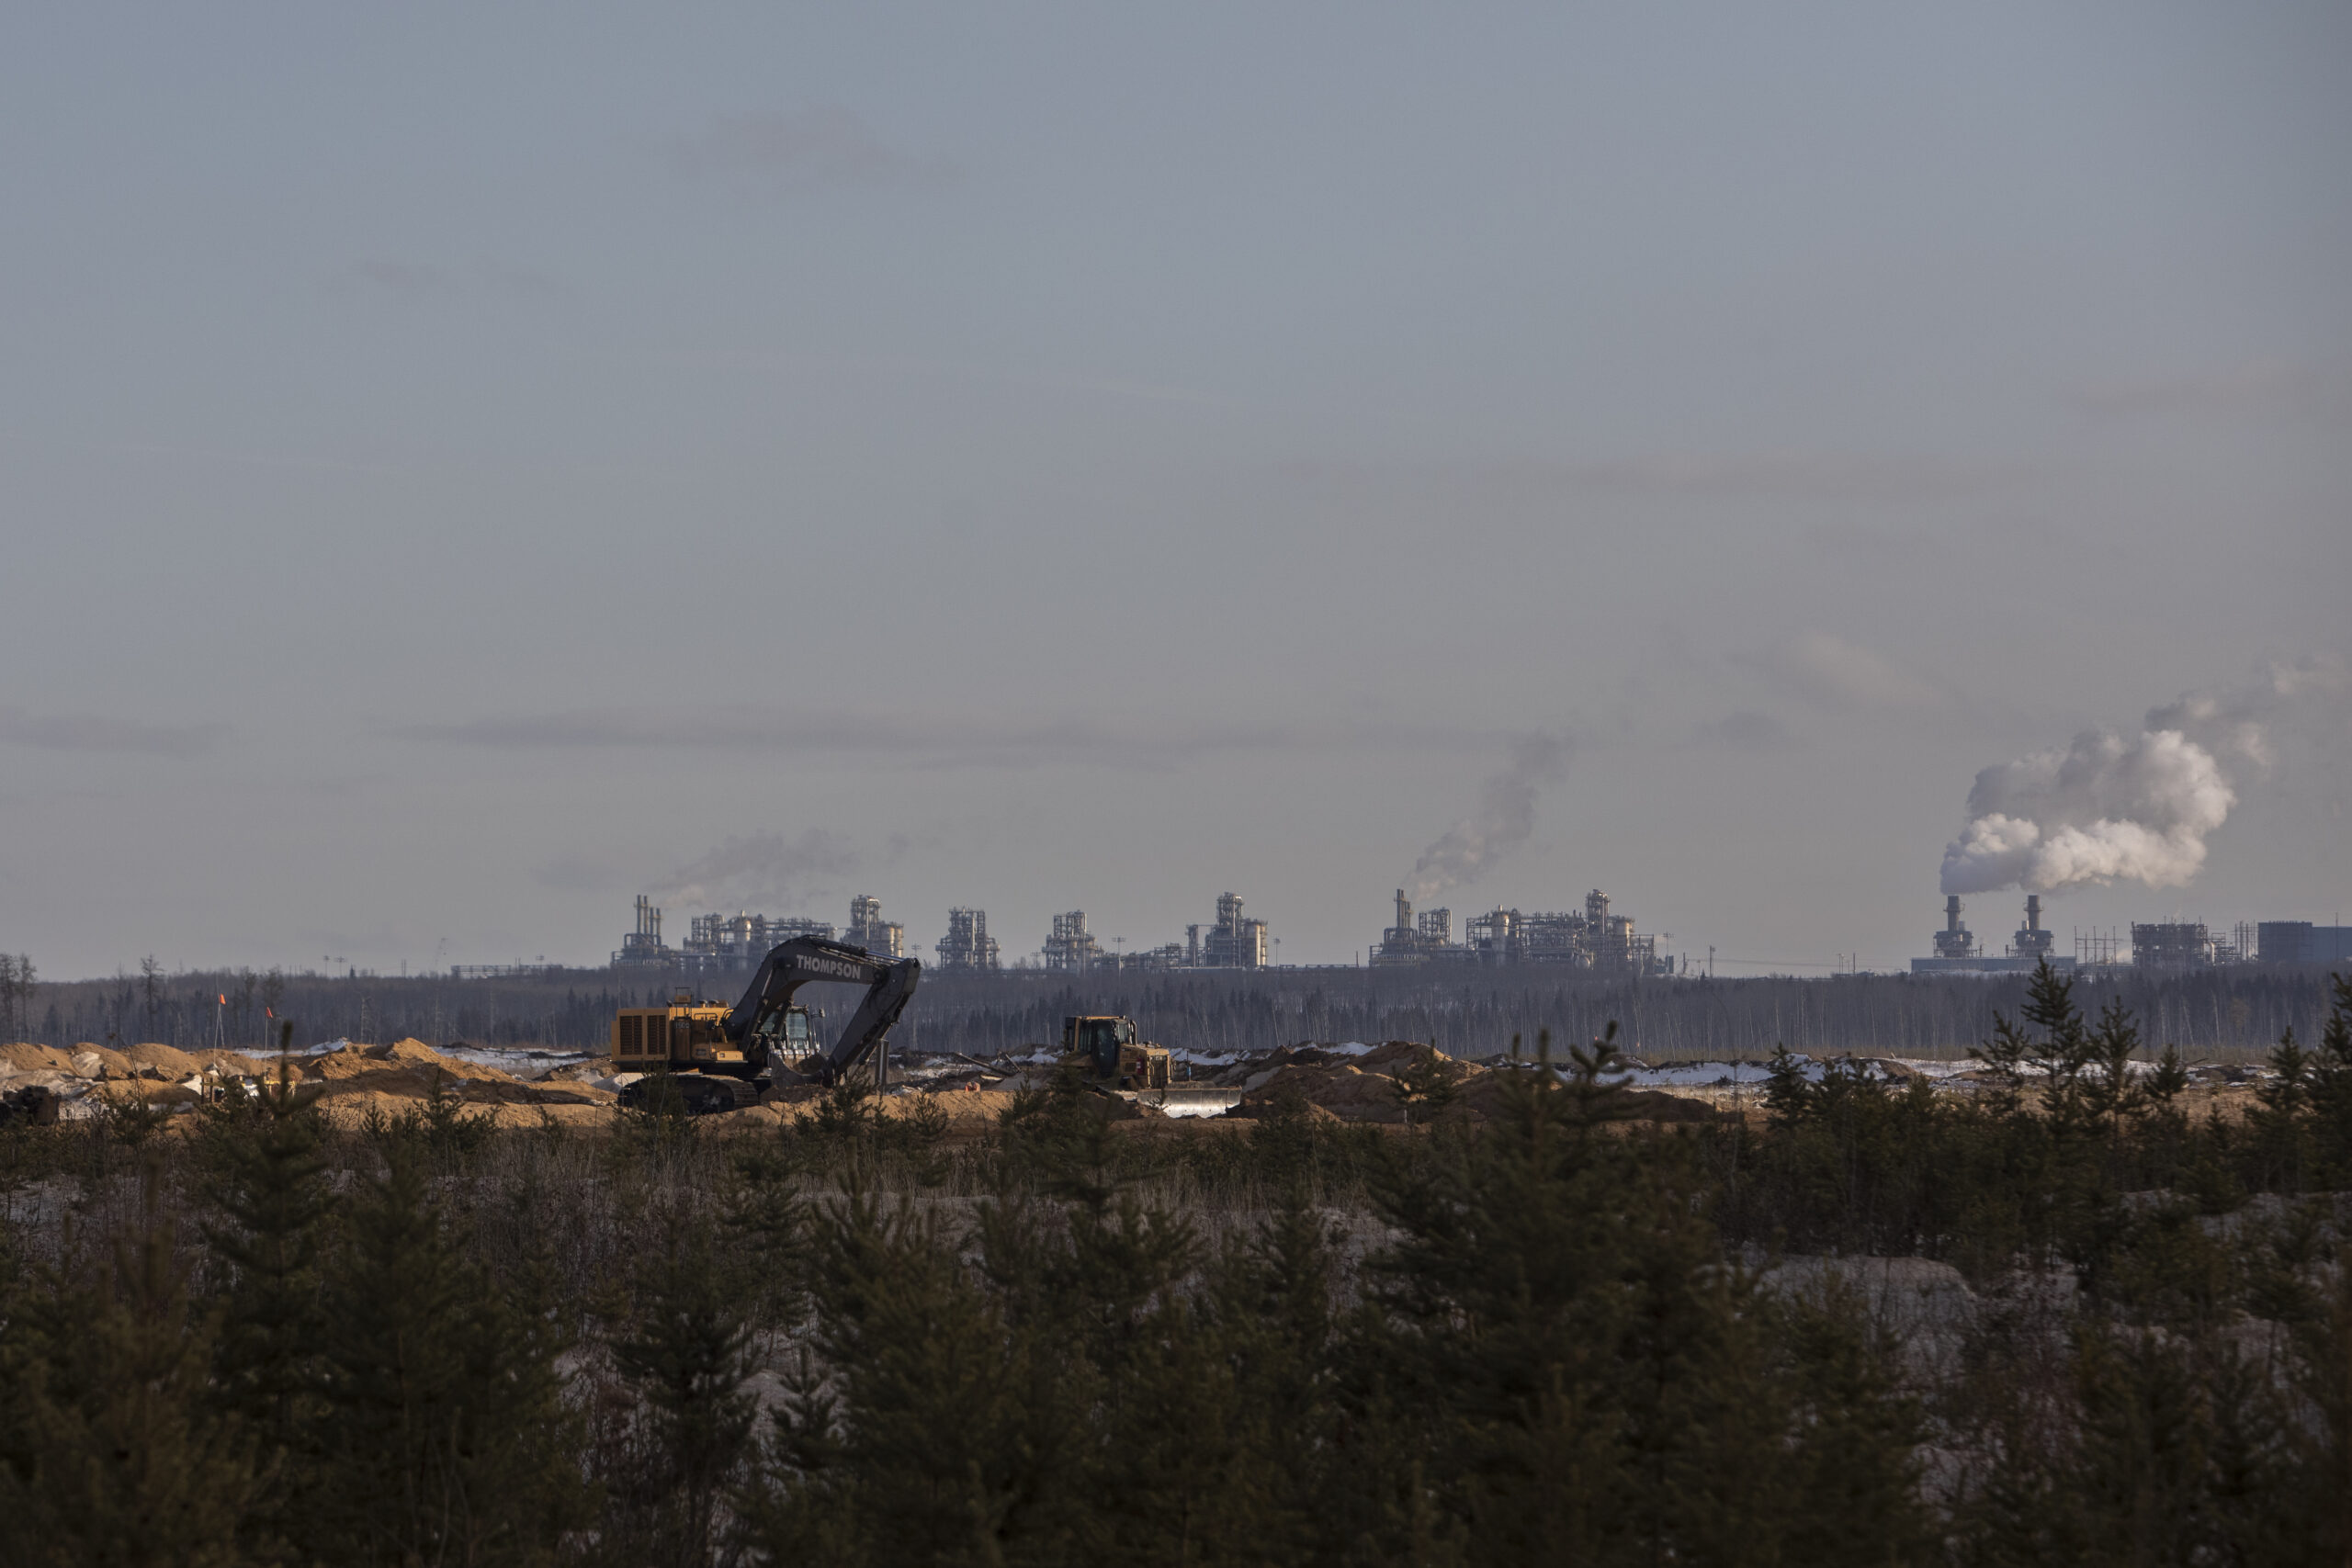 Excavators in the foreground at Suncor's Fort Hills oilsands mine with a refinery visible on the horizon